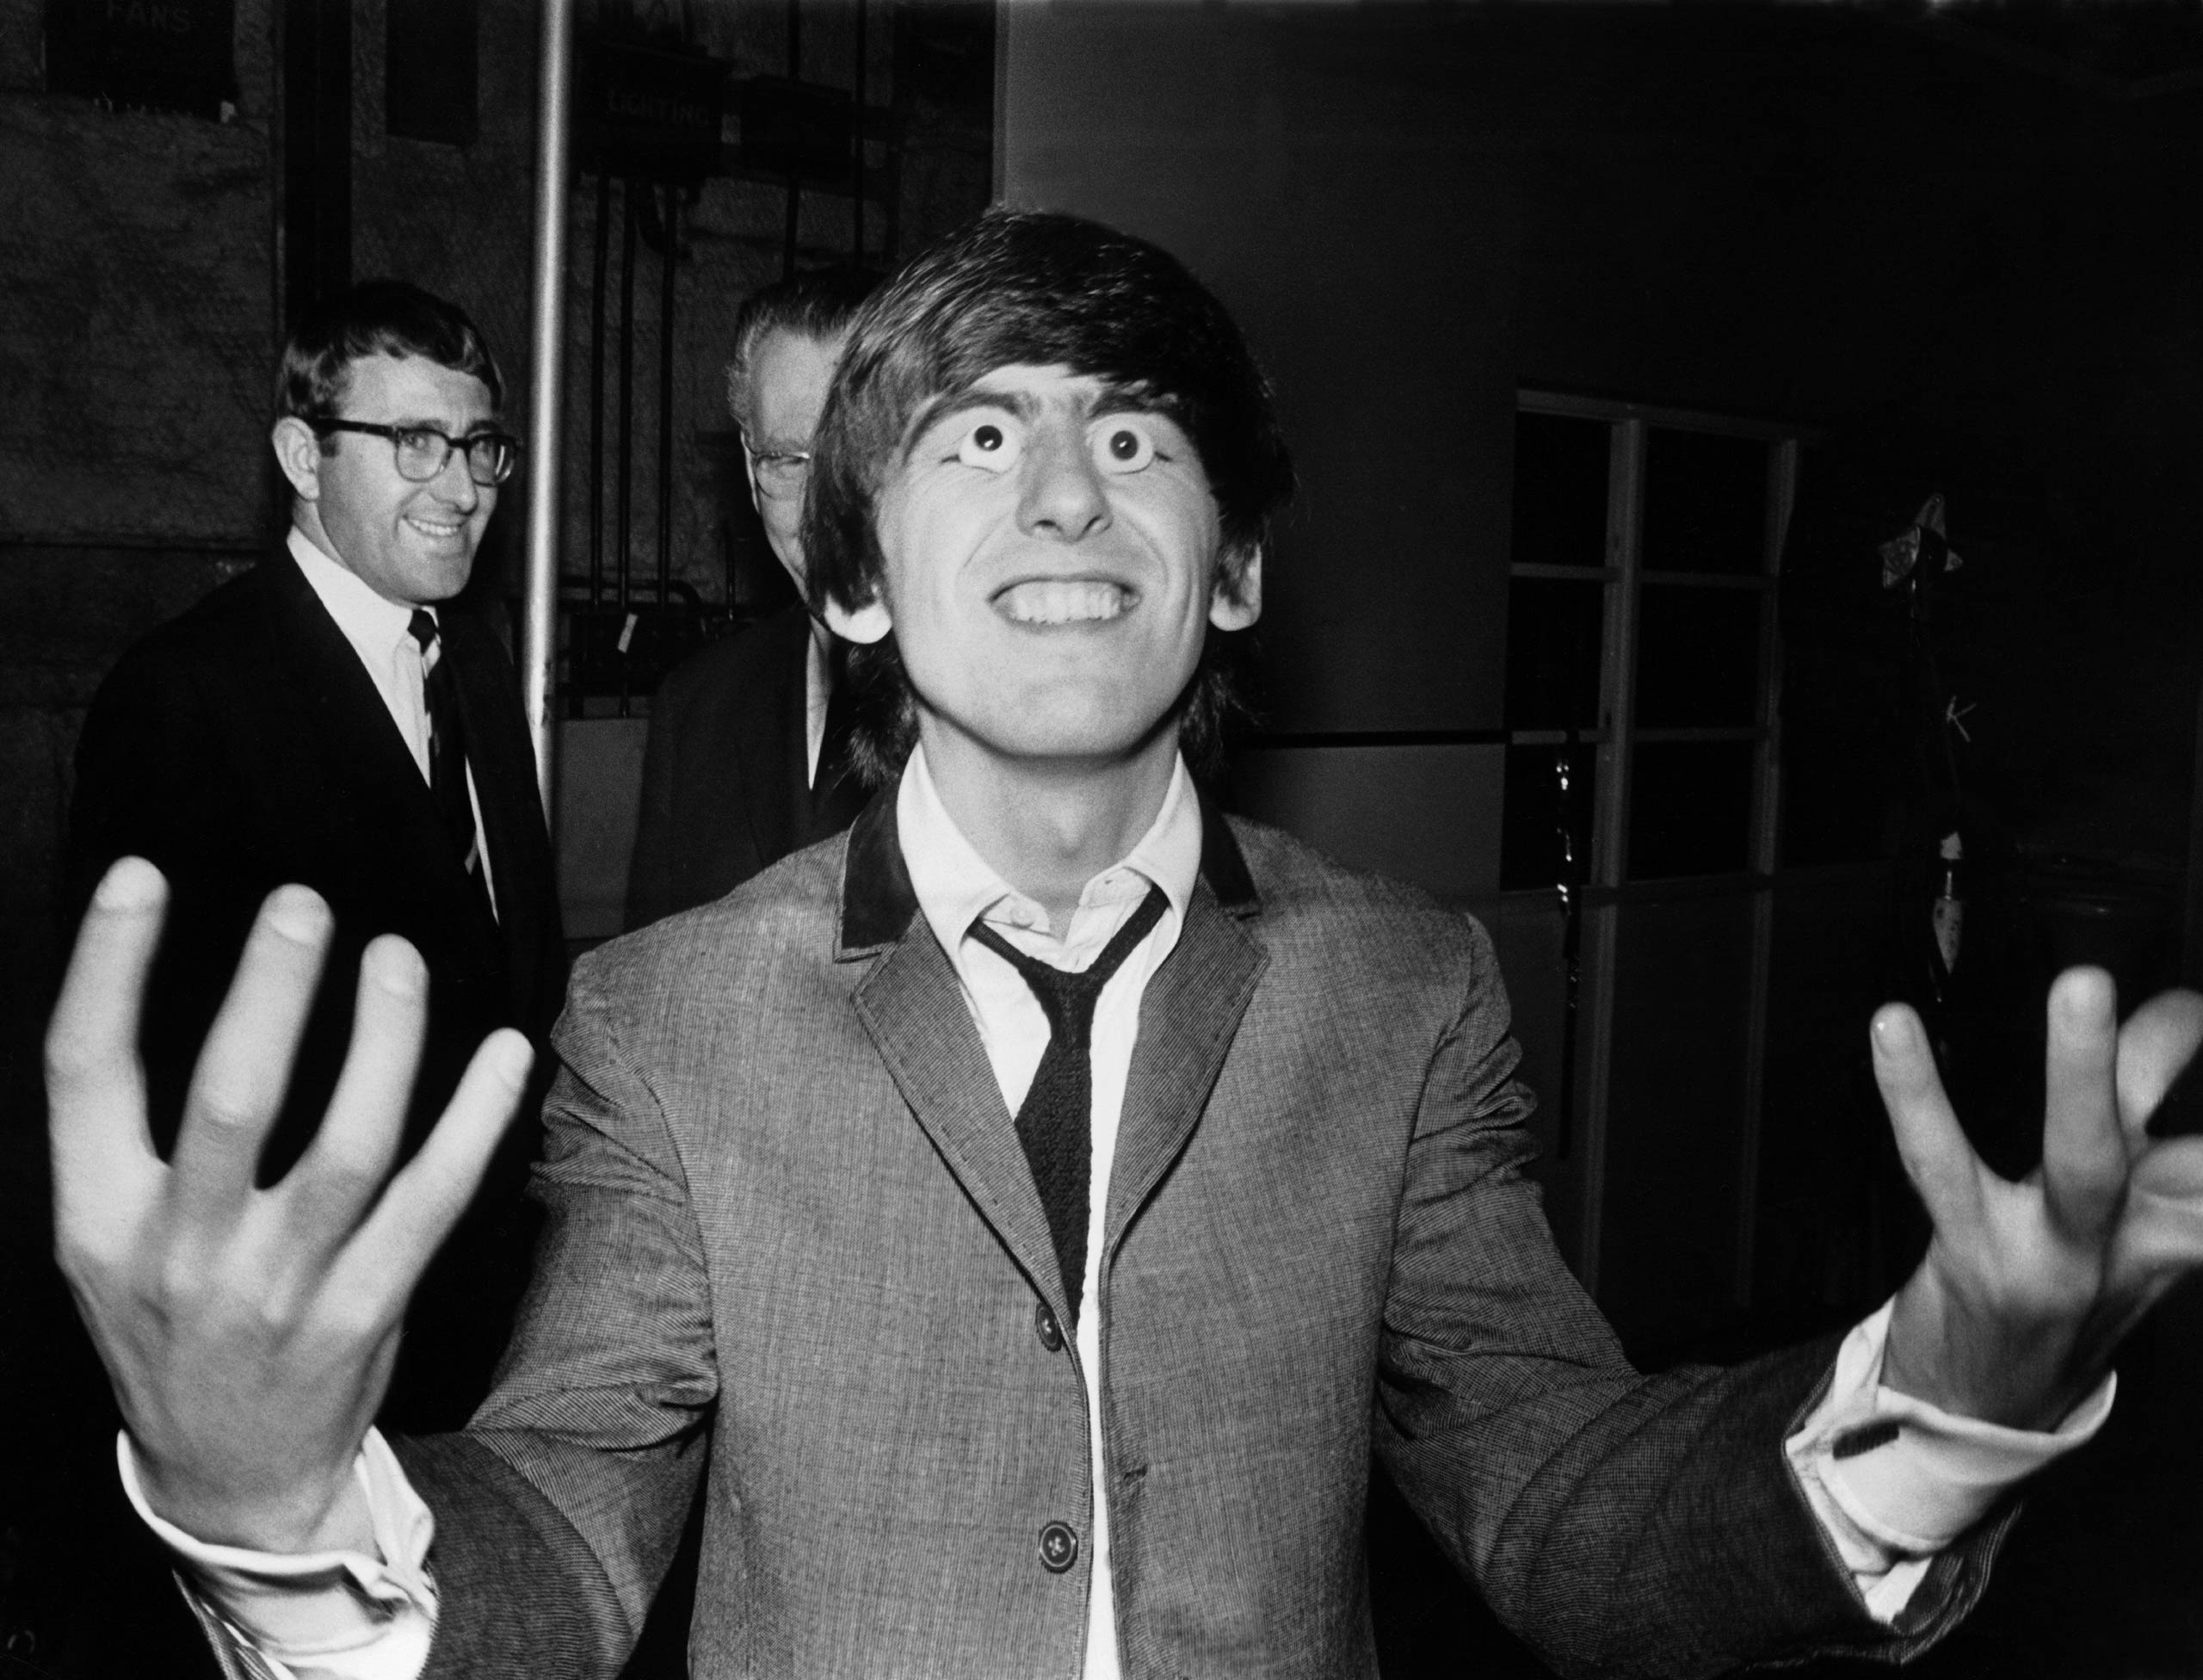 George Harrison tries out a pair of false eyes made by Madame Tussaud's waxwork museum.